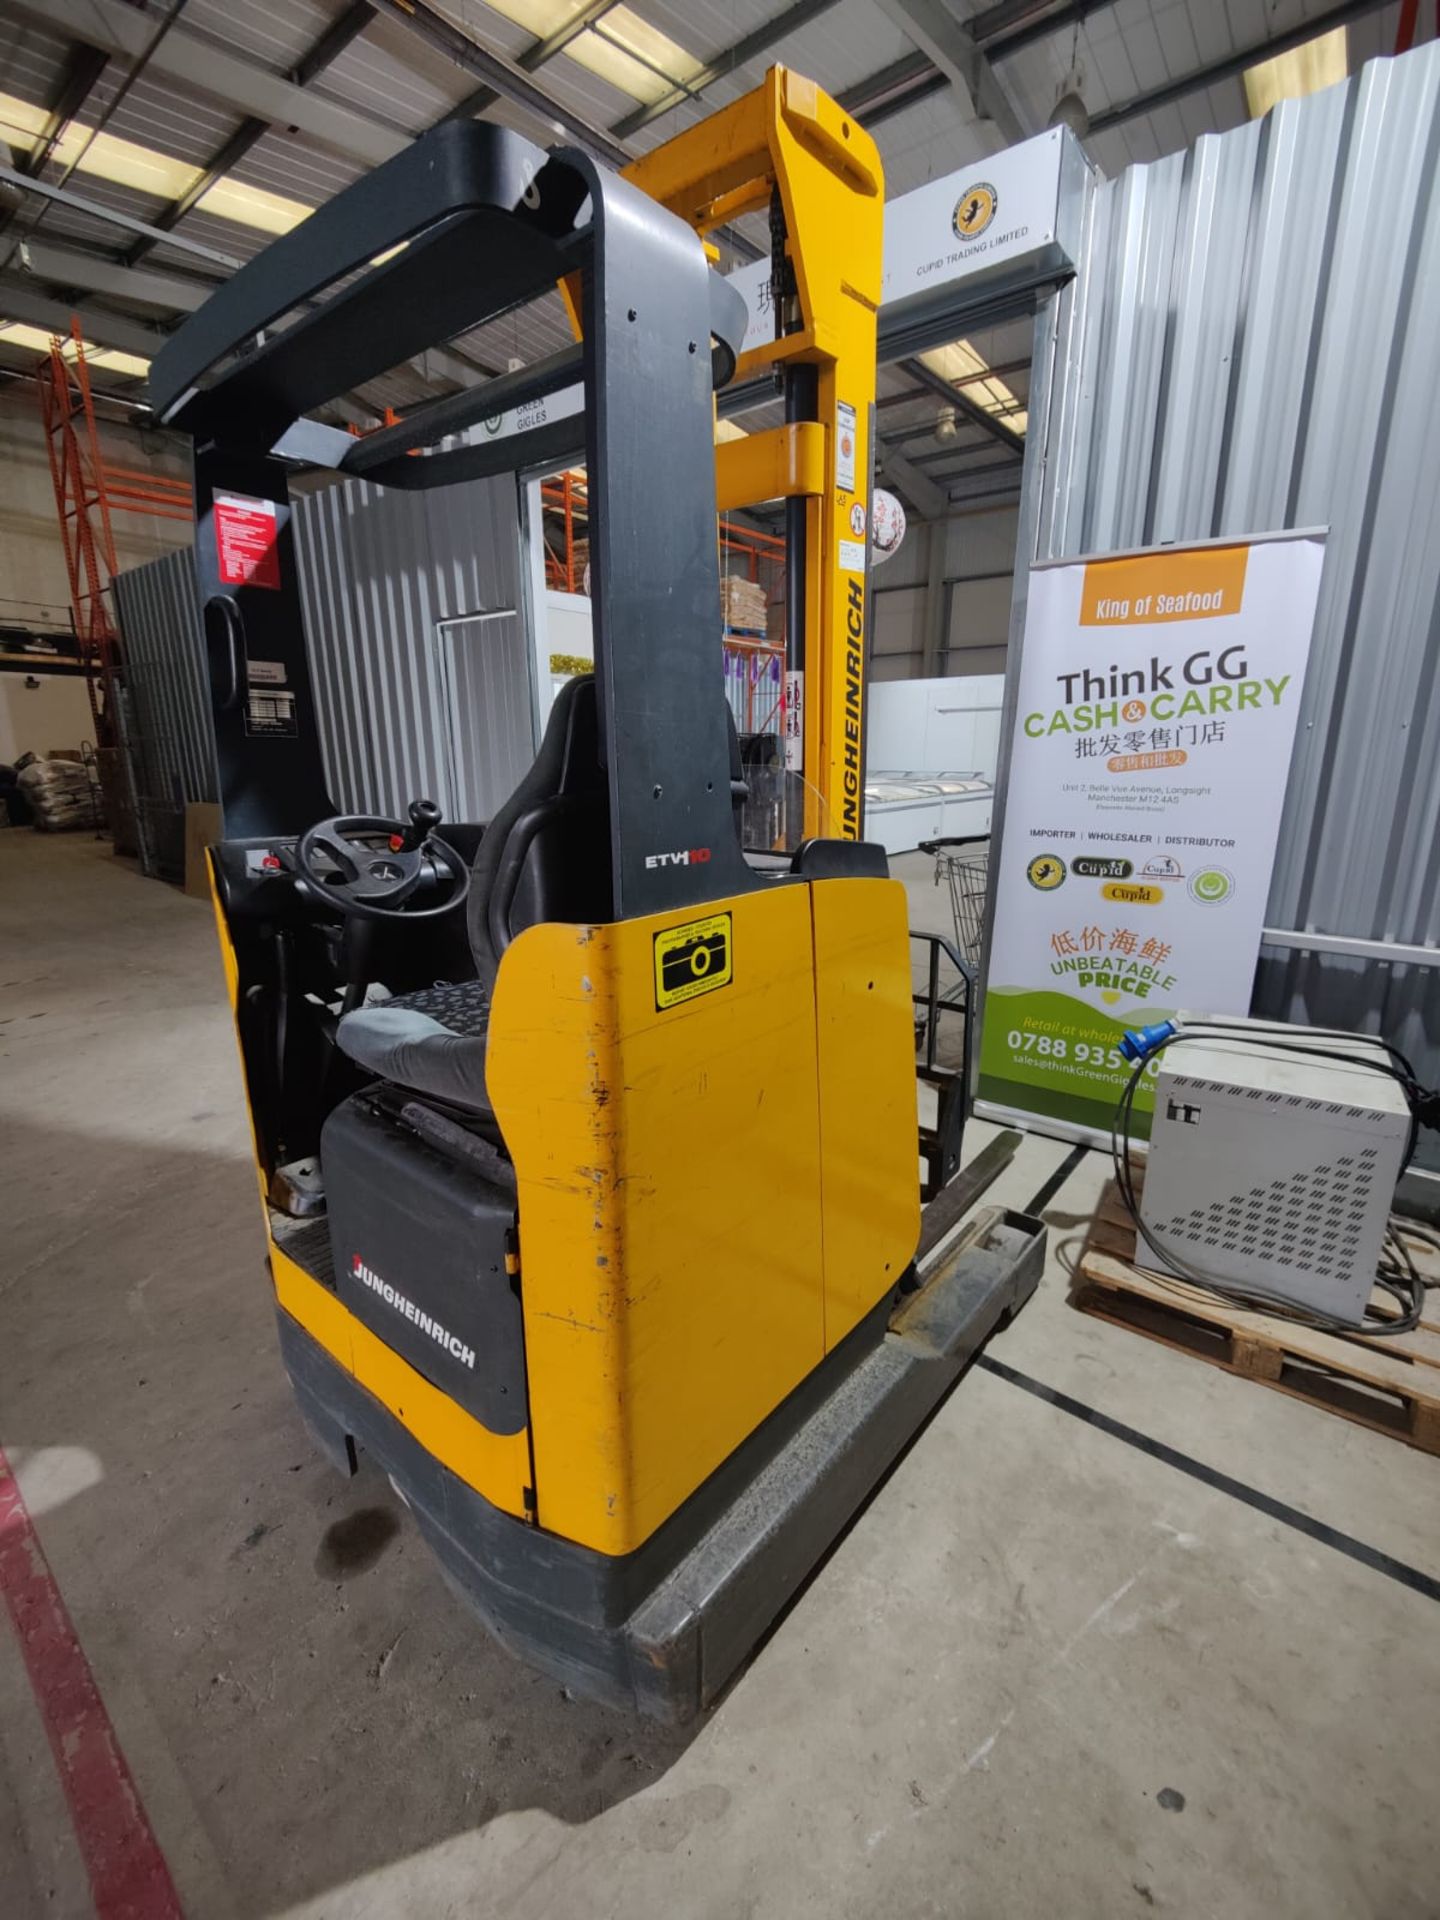 1 x Jungheinrich Electric Forklift Reach Truck - 1 Ton Capacity - 5900mm Lift Height - Image 12 of 36